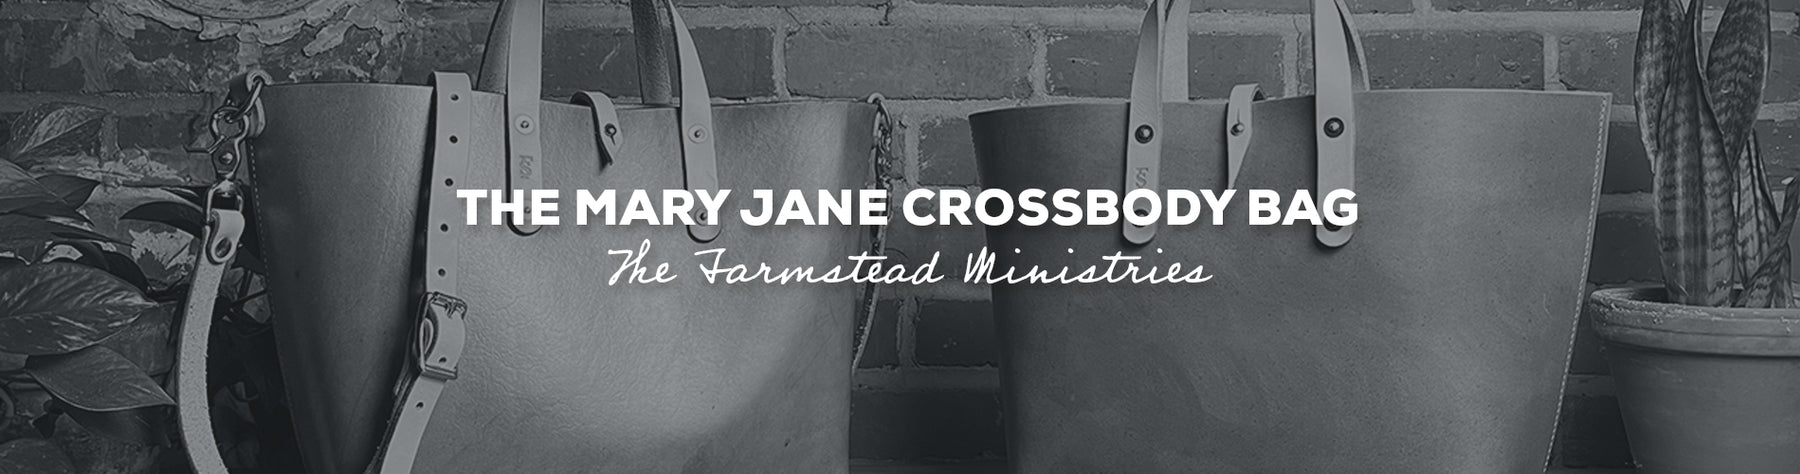 Gift Idea: The Mary Jane Crossbody Bag by The Farmstead Ministries